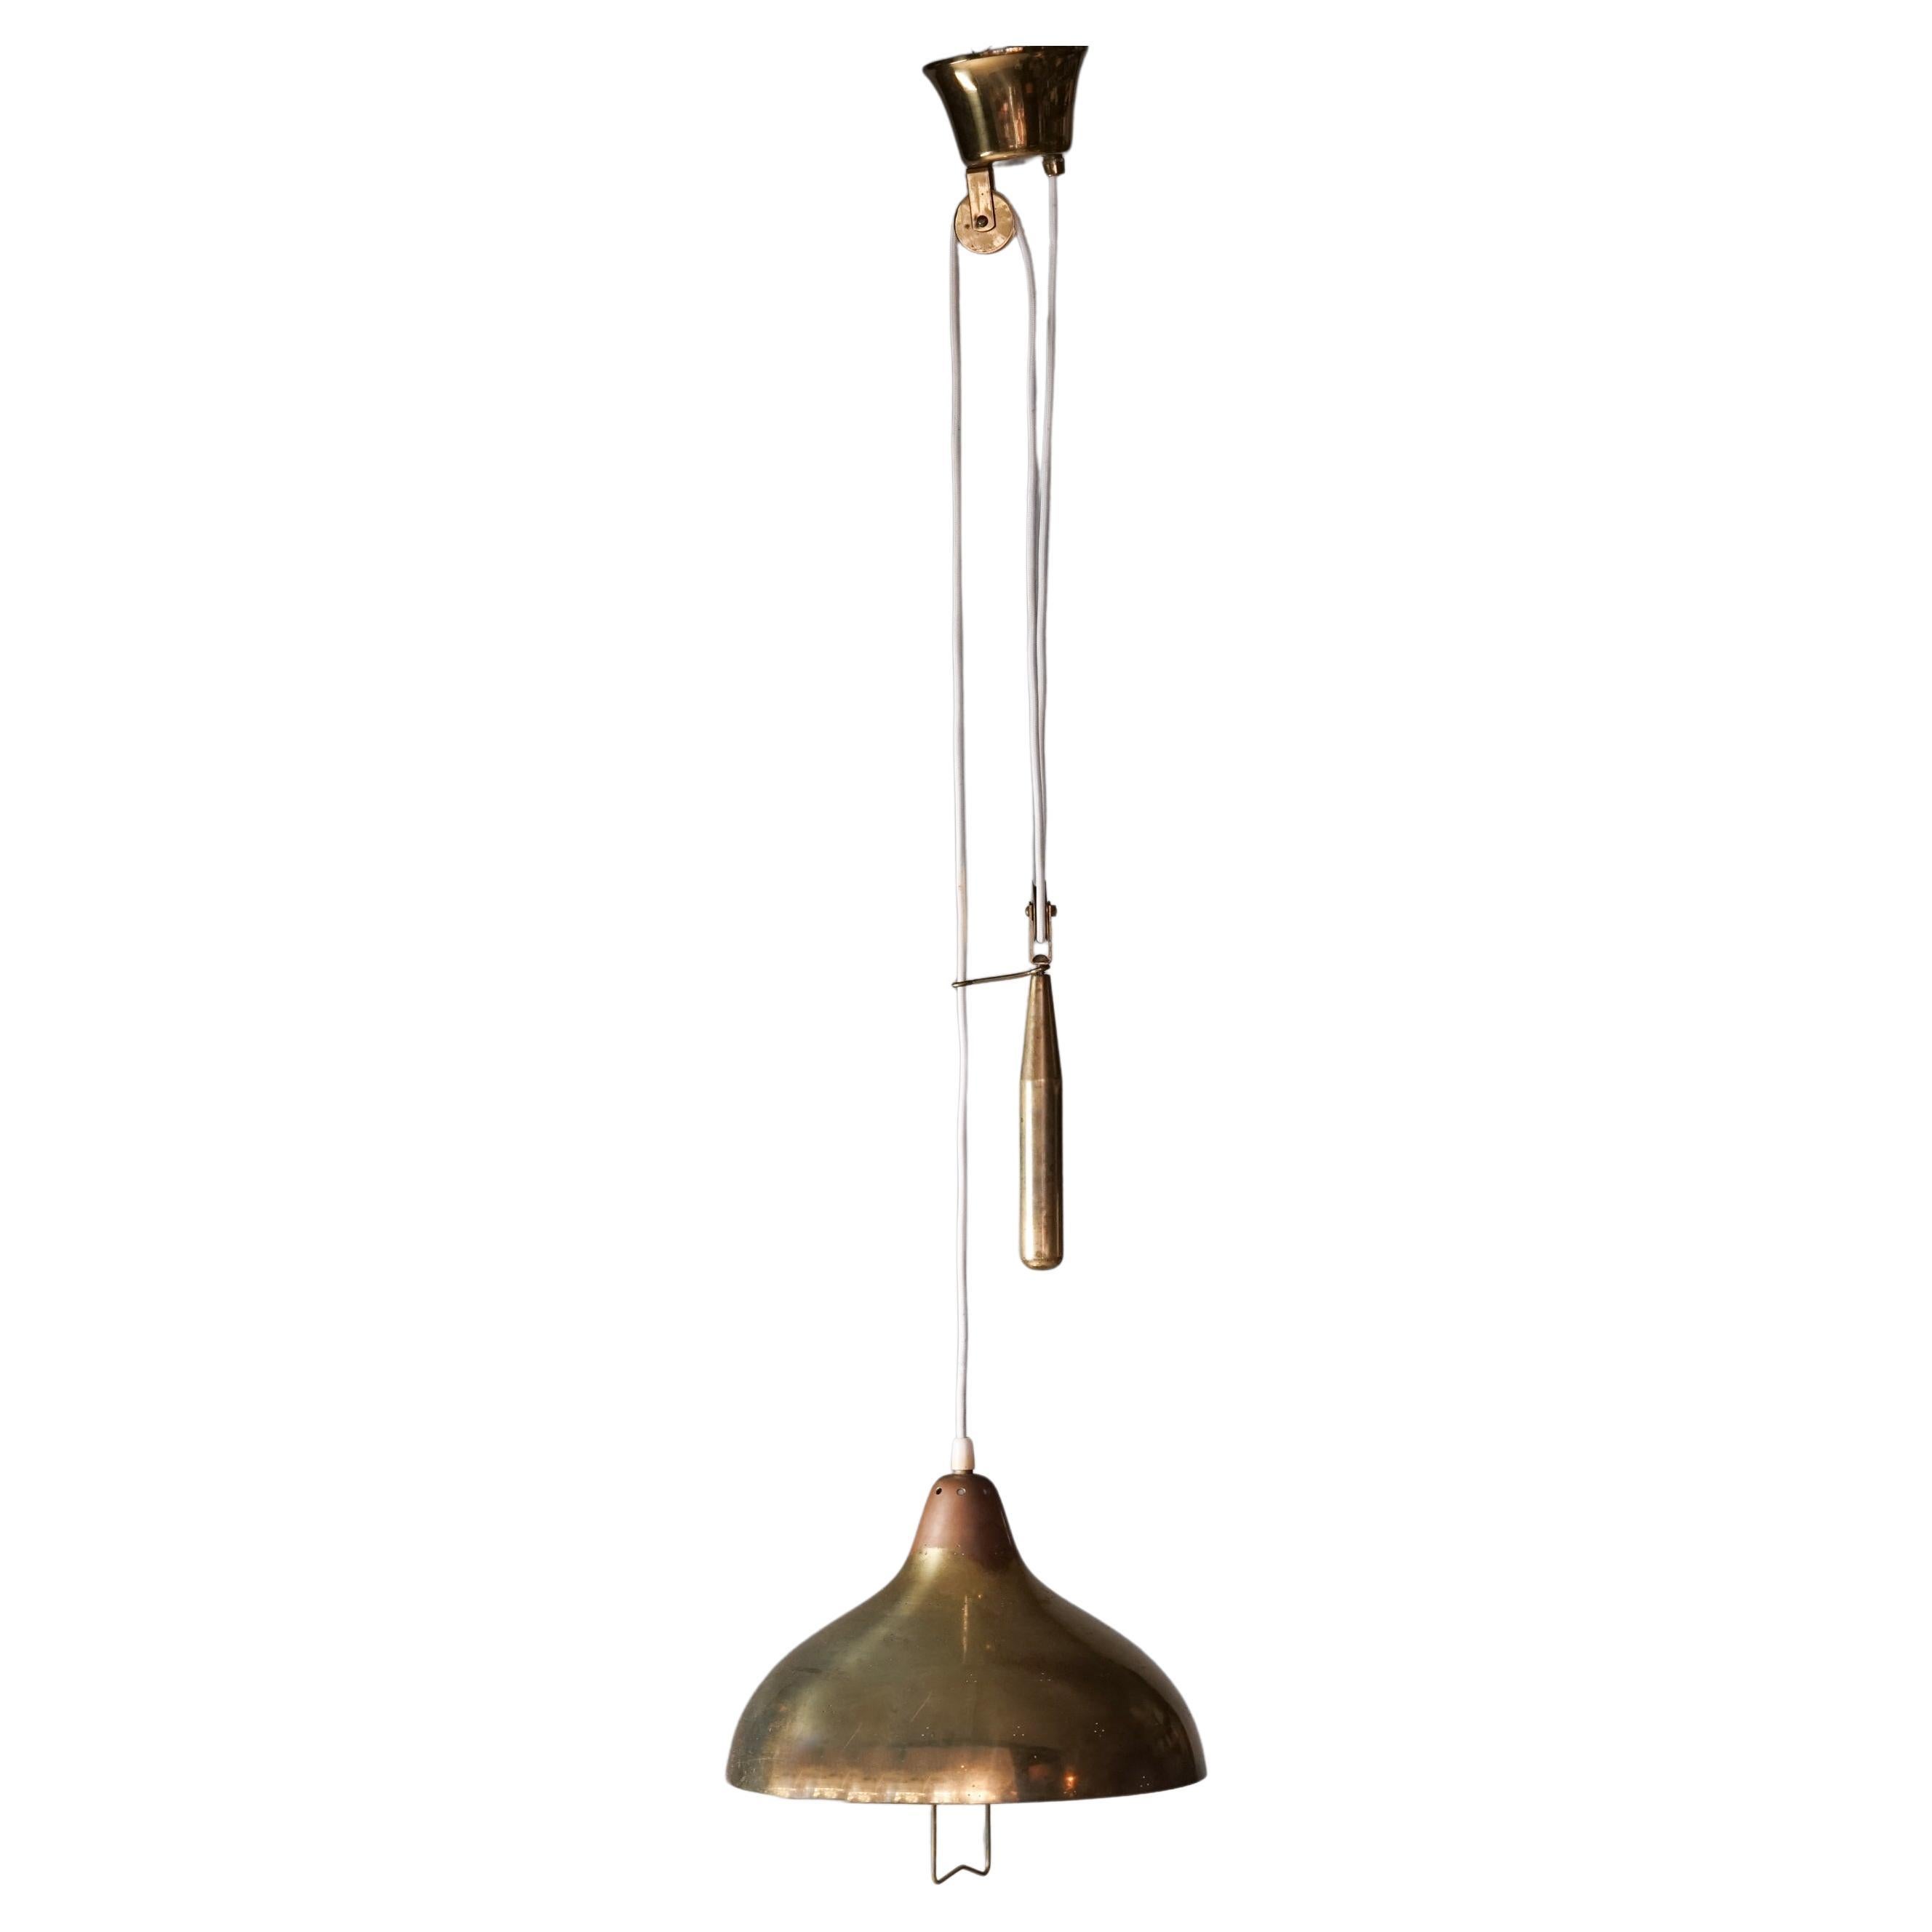 Counterweight Brass Pendant by Itsu Oy, 1950s